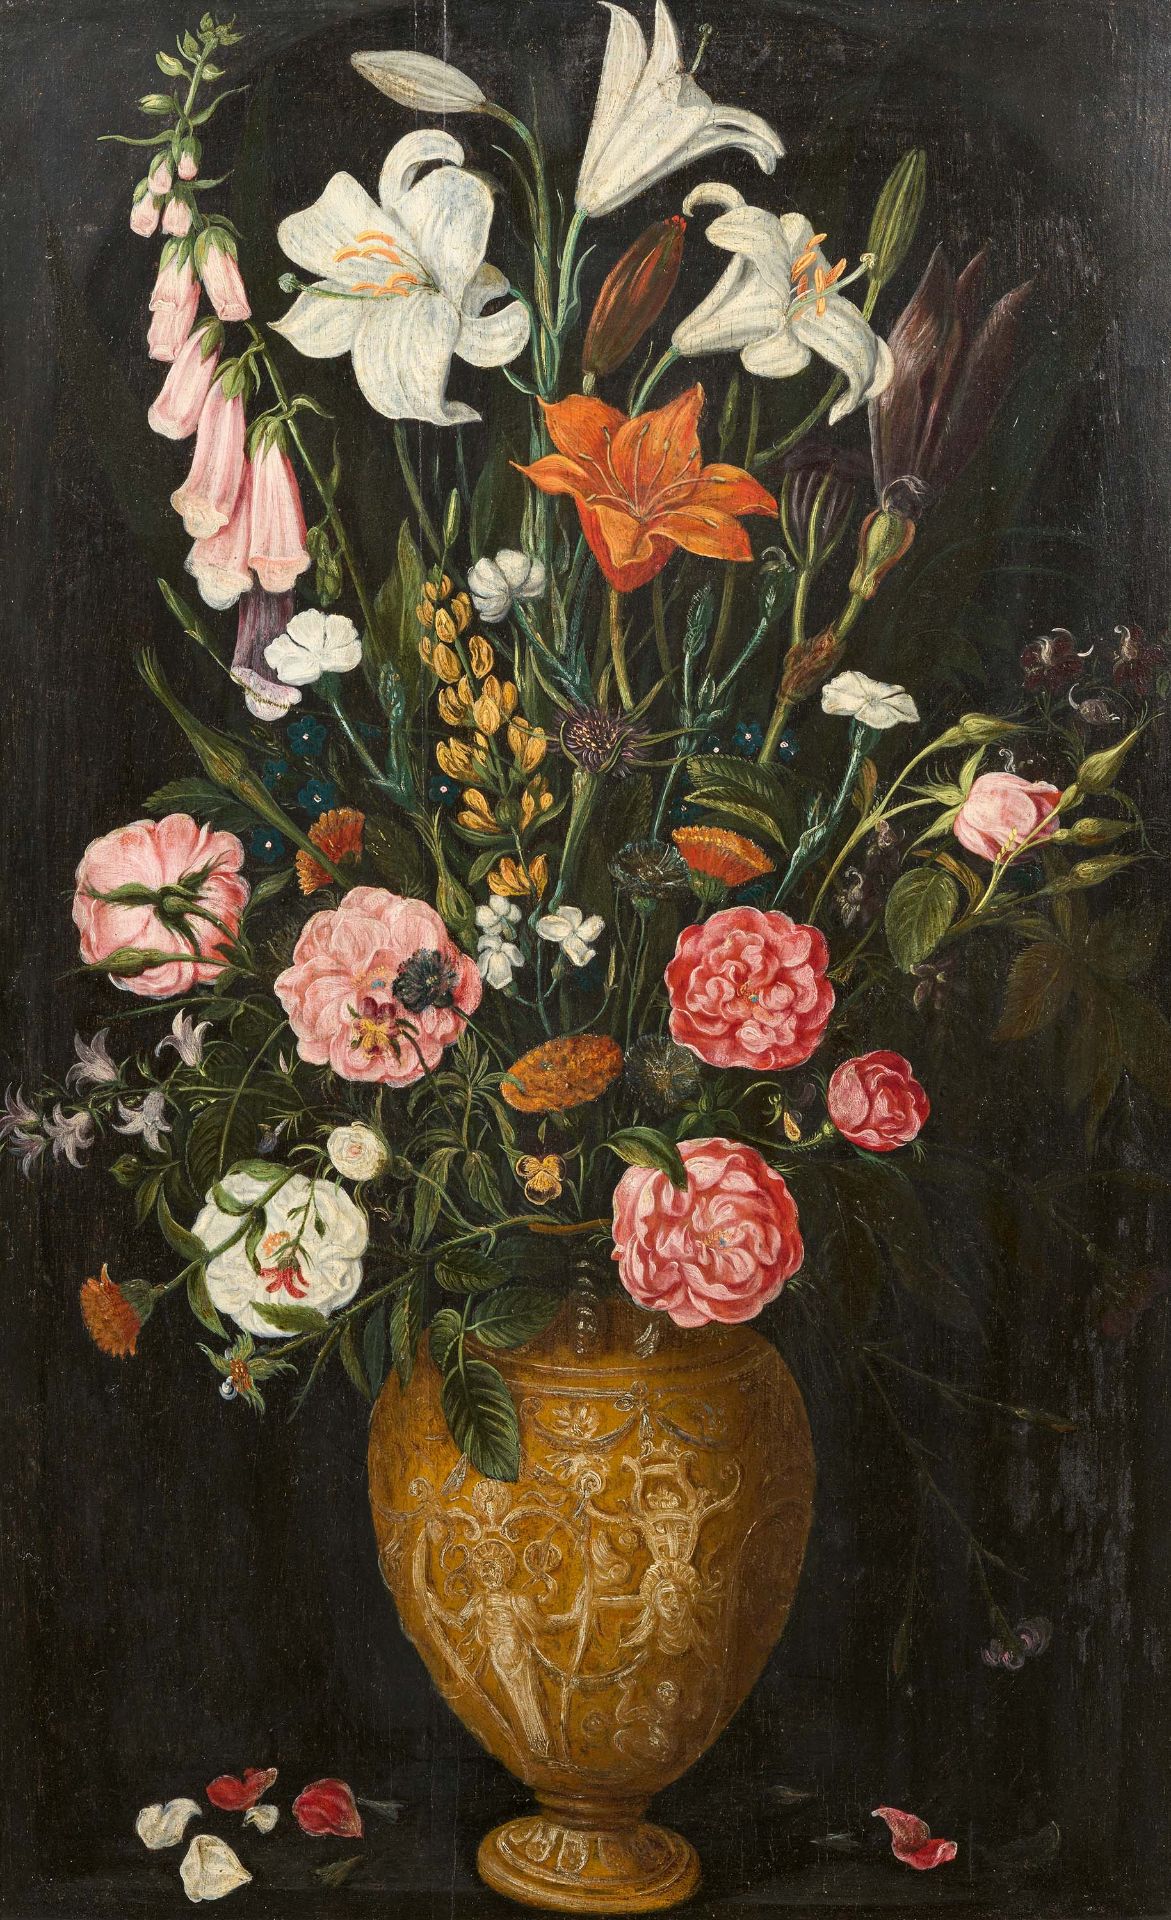 Flemish School: Roses and Lilies in a Vase